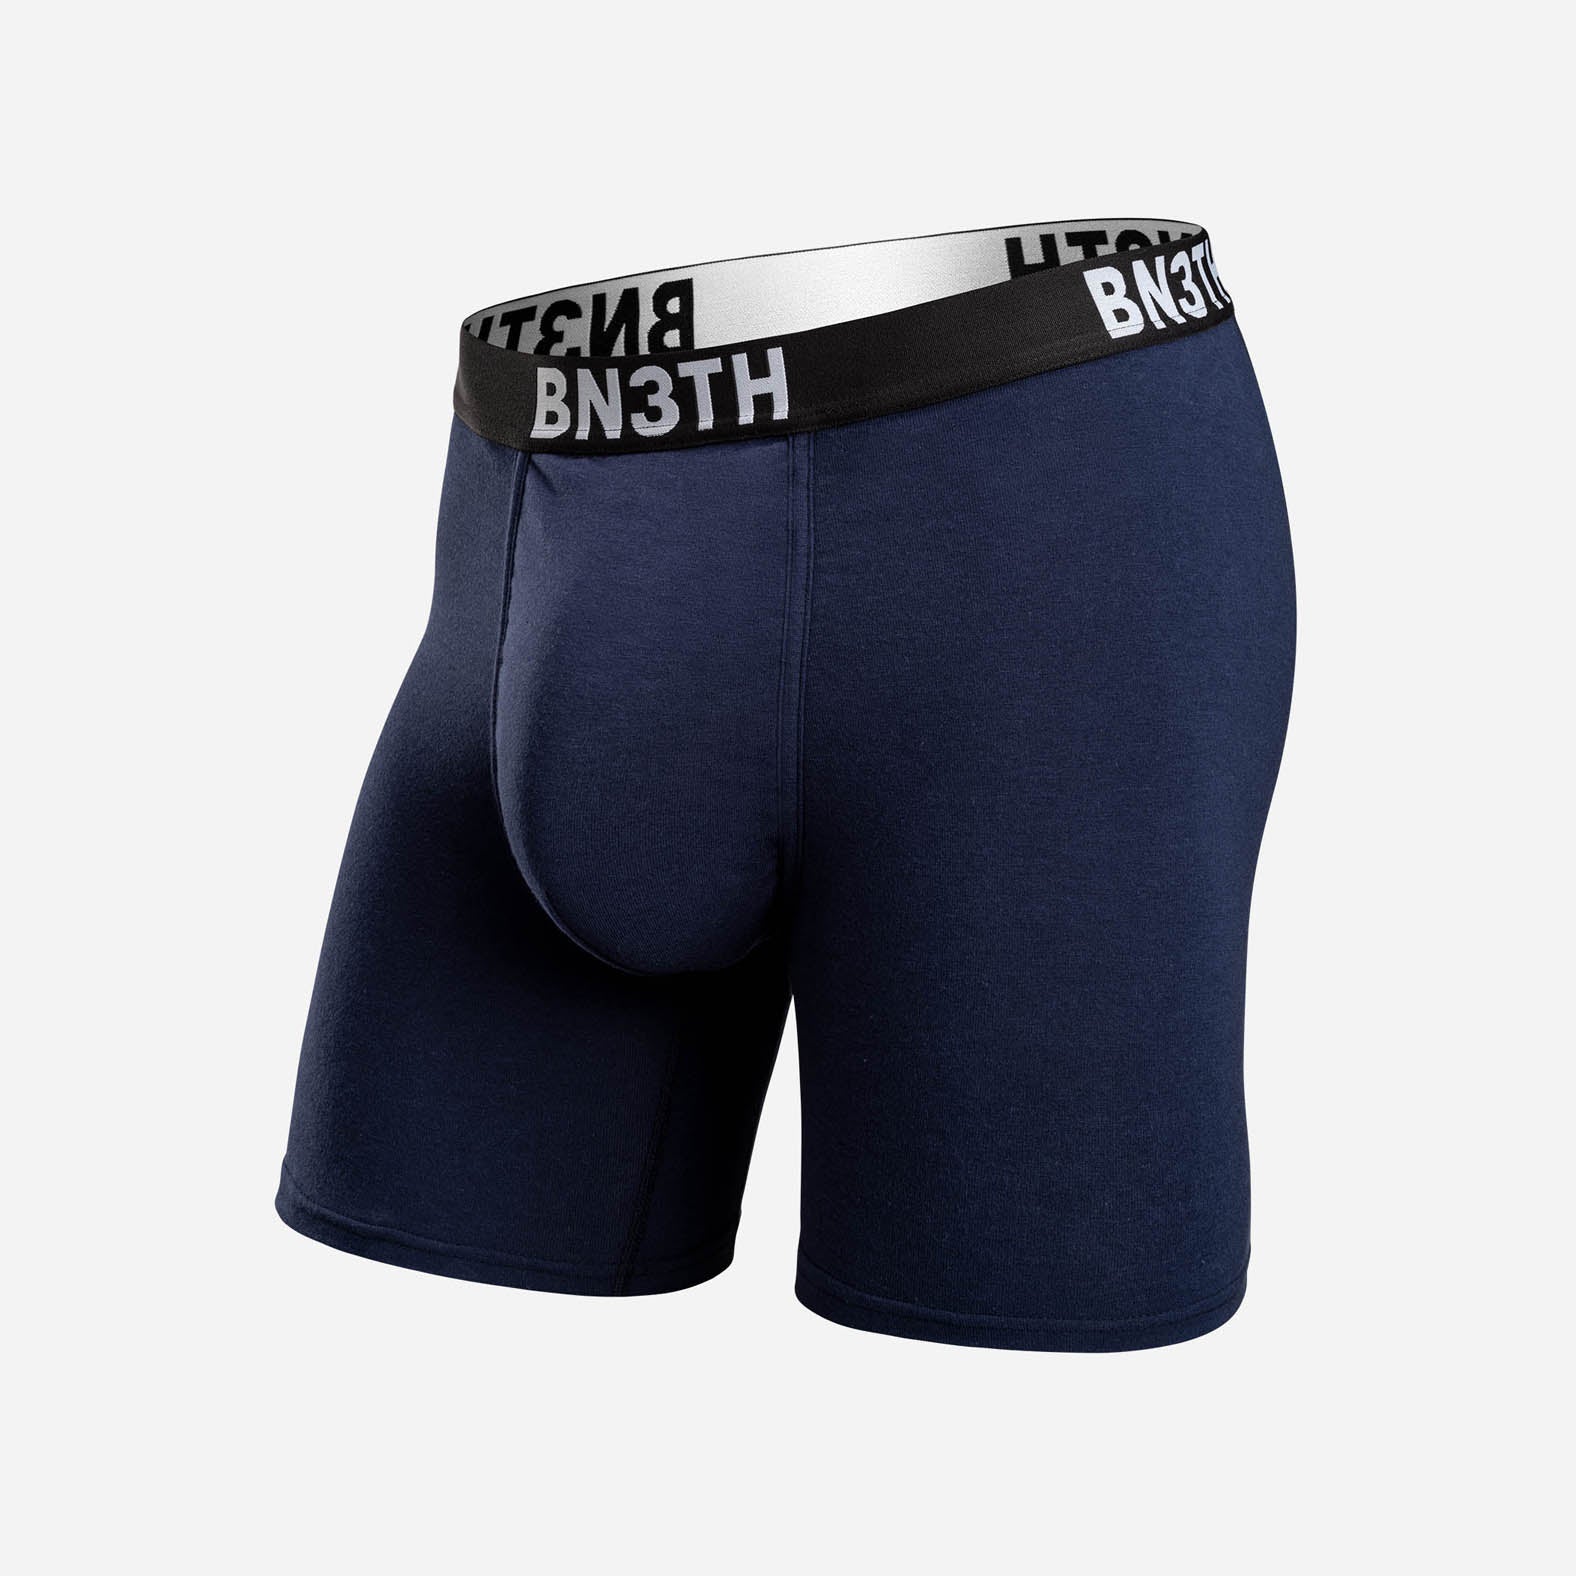 BN3TH Classic Boxer Brief - Space Age Navy